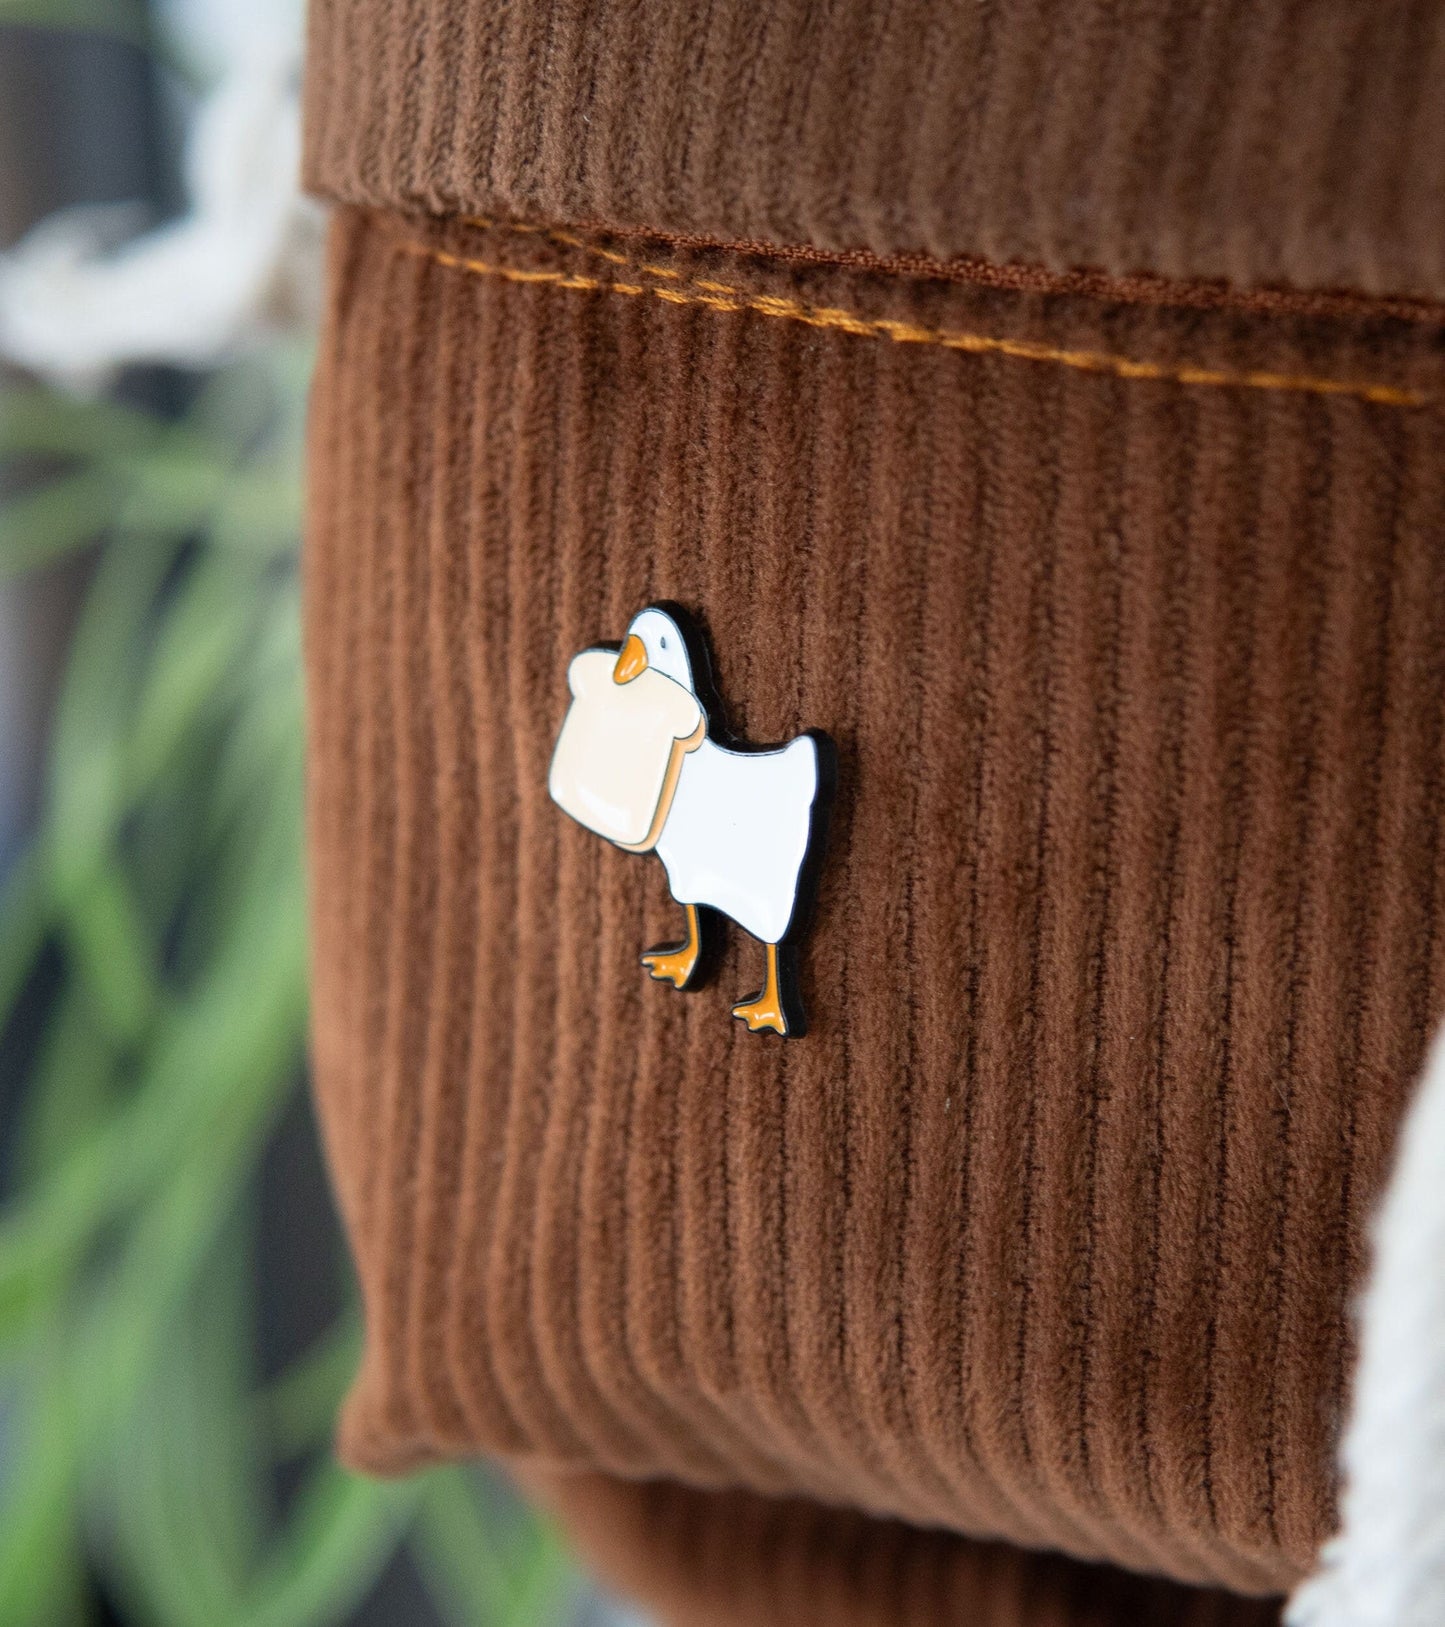 Toast-Thief Duck Enamel Pin - Charming Bread-Loving Duck Accessory for Casual Fun